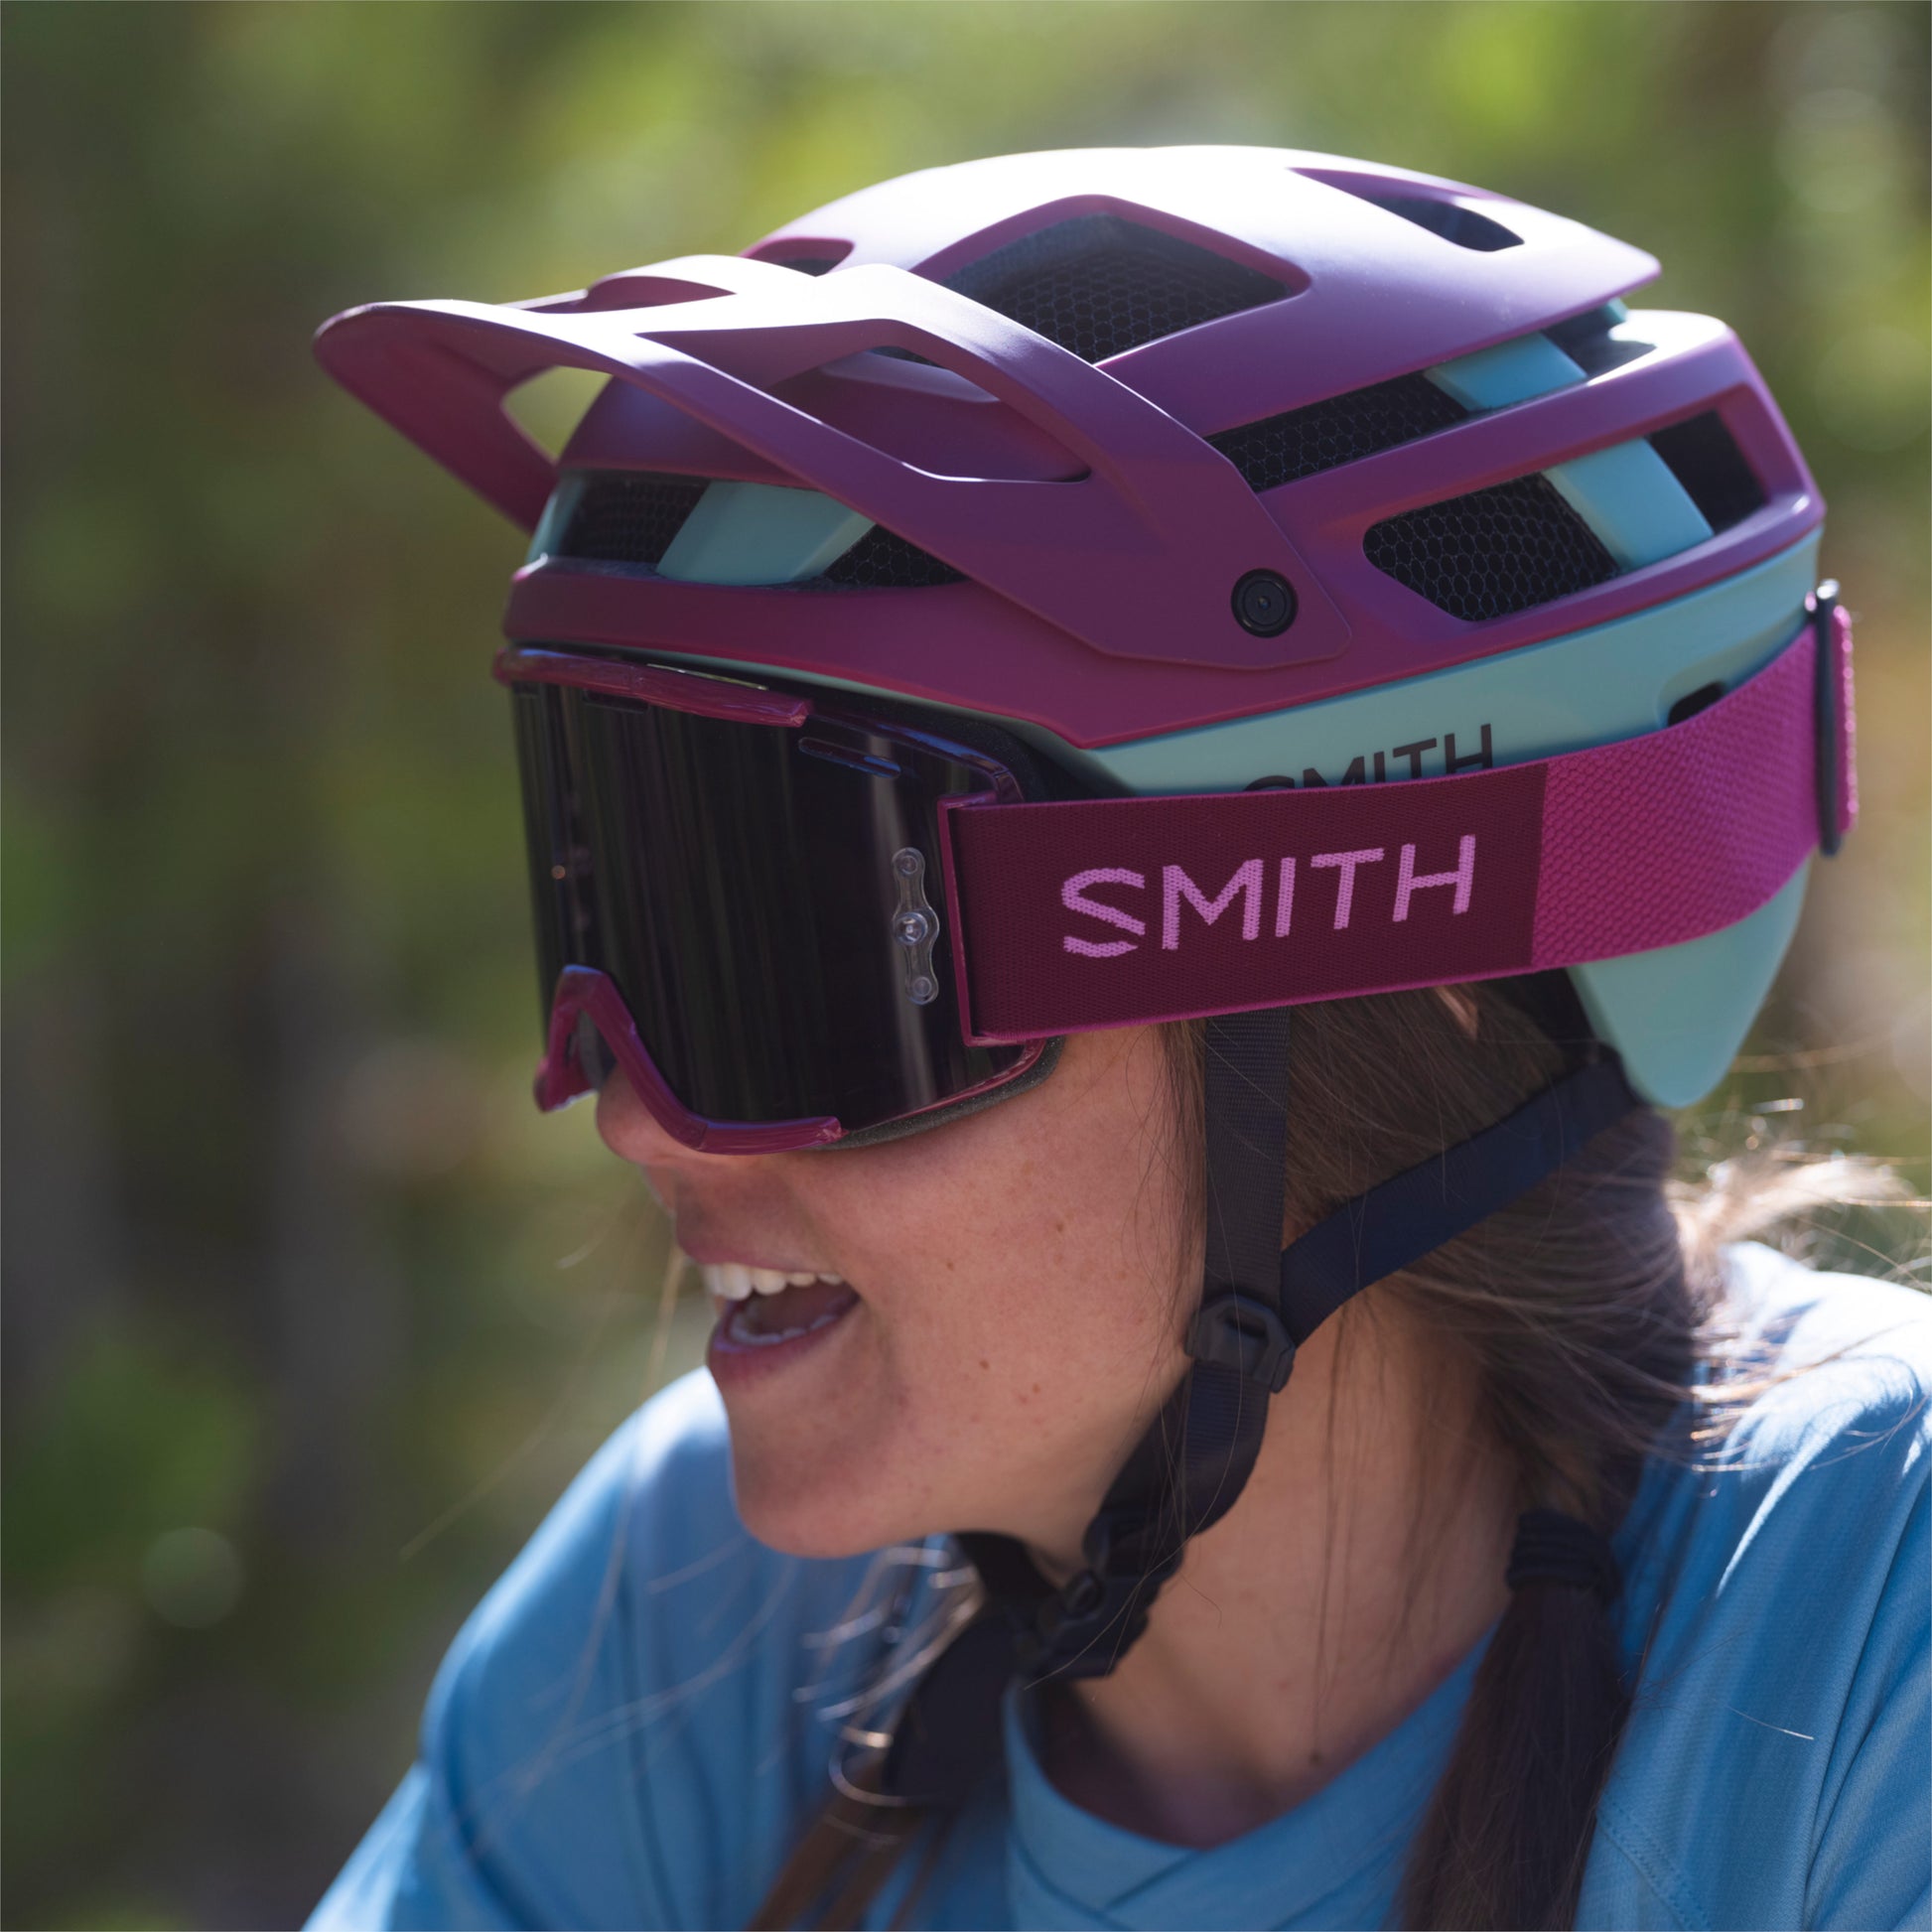 Smith Optics Forefront MIPS MTB Trail Helmet woman wearing helmet with goggles